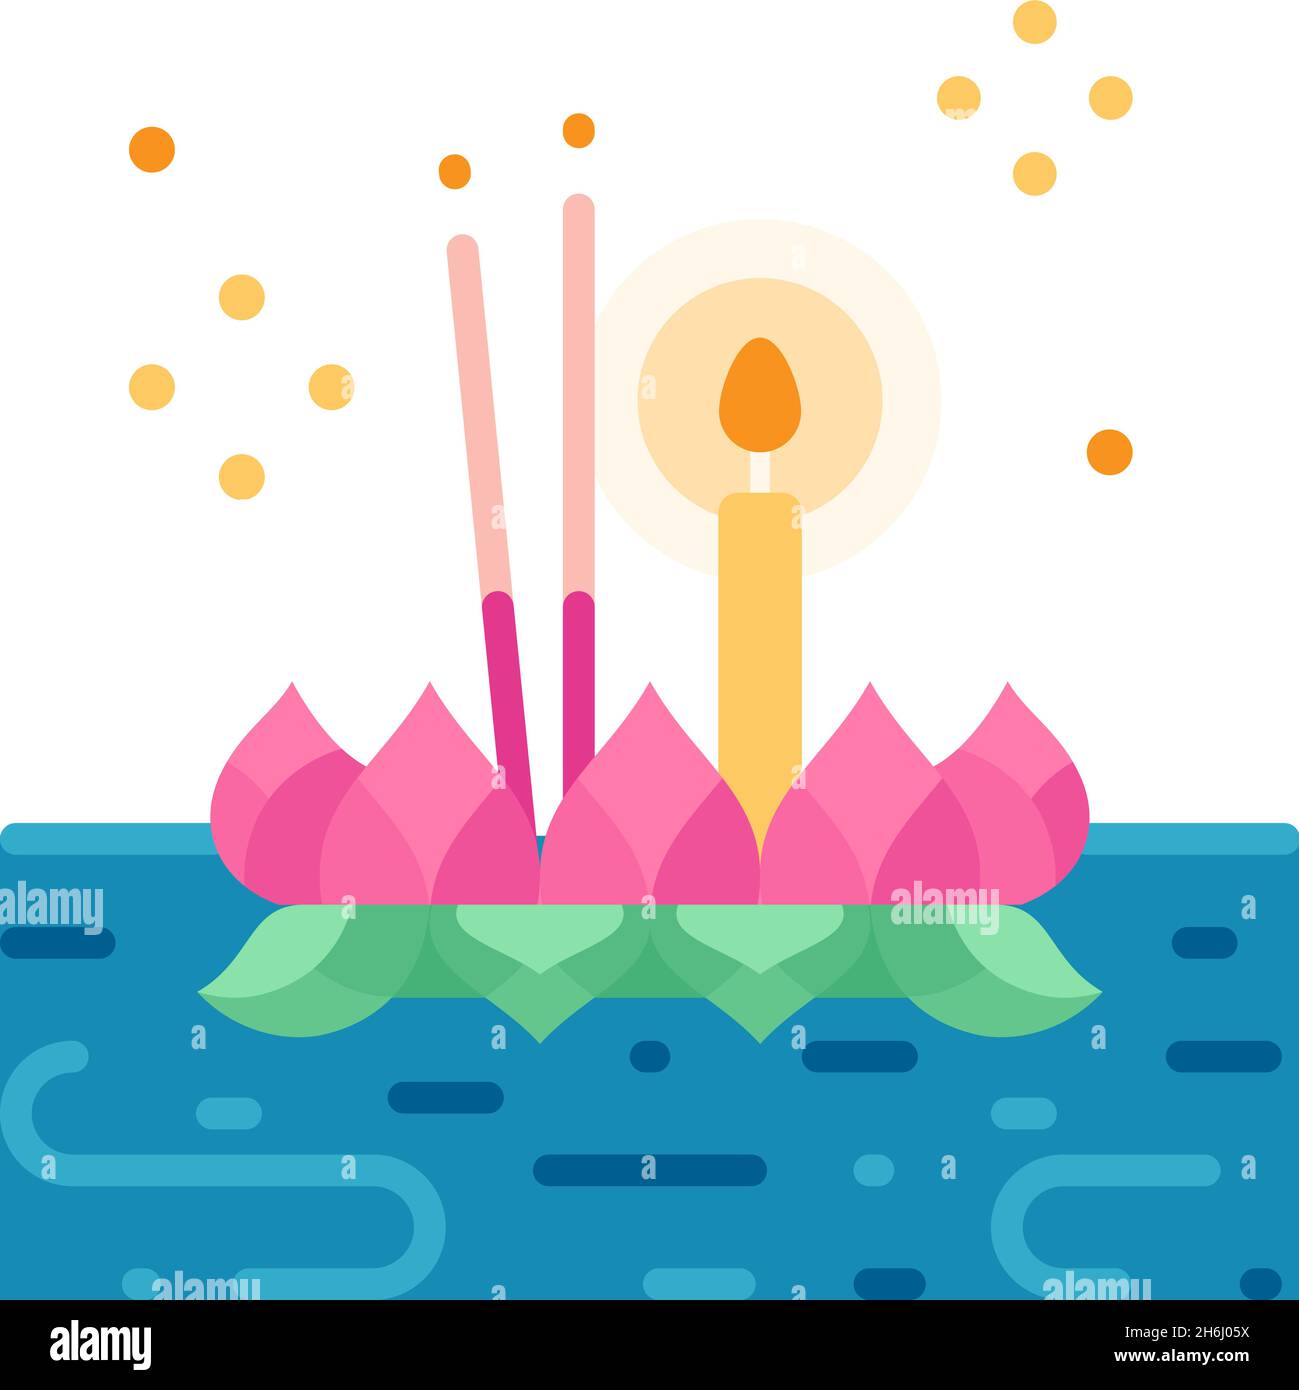 Loi Krathong festival flat icon vector illustration.Loi Krathong is a Thailand floating decorated basket annual festival to respect river spirit Stock Vector